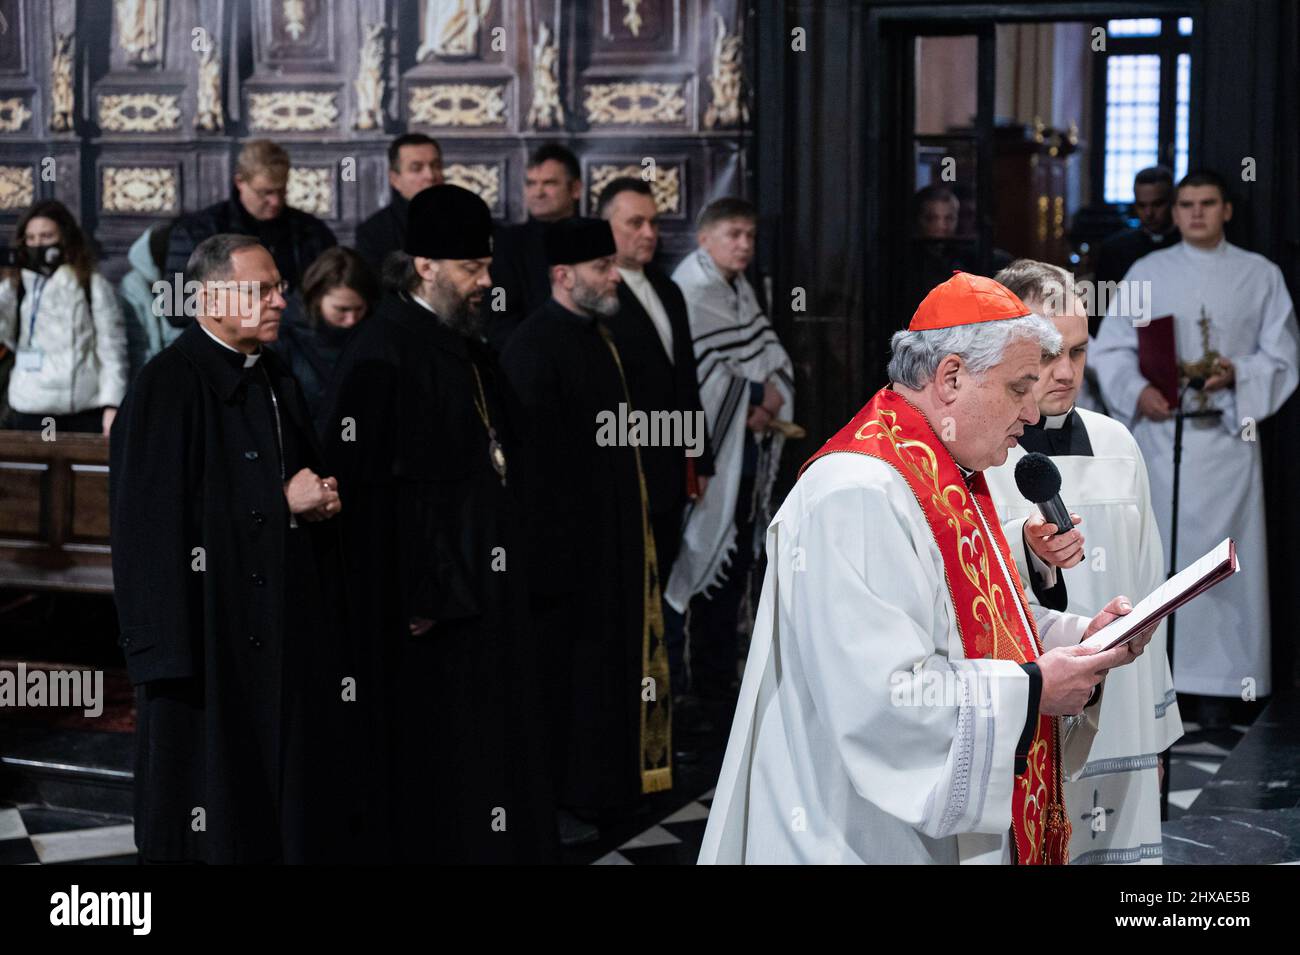 Lviv, Ukraine. 10th Mar, 2022. Cardinal Konrad Krajewsk (R2) leads the service. The Polish Cardinal Konrad Krajewski, the Papal Almoner in Ukraine, attended the interfaith prayer service at the Cathedral of the Assumption of the Blessed Virgin Mary (Lviv Metropolitan Basilica) in Lviv at the presence of representatives of the Pan-Ukrainian Council of Churches and different religious communities. (Photo by Valeria Ferraro/SOPA Images/Sipa USA) Credit: Sipa USA/Alamy Live News Stock Photo